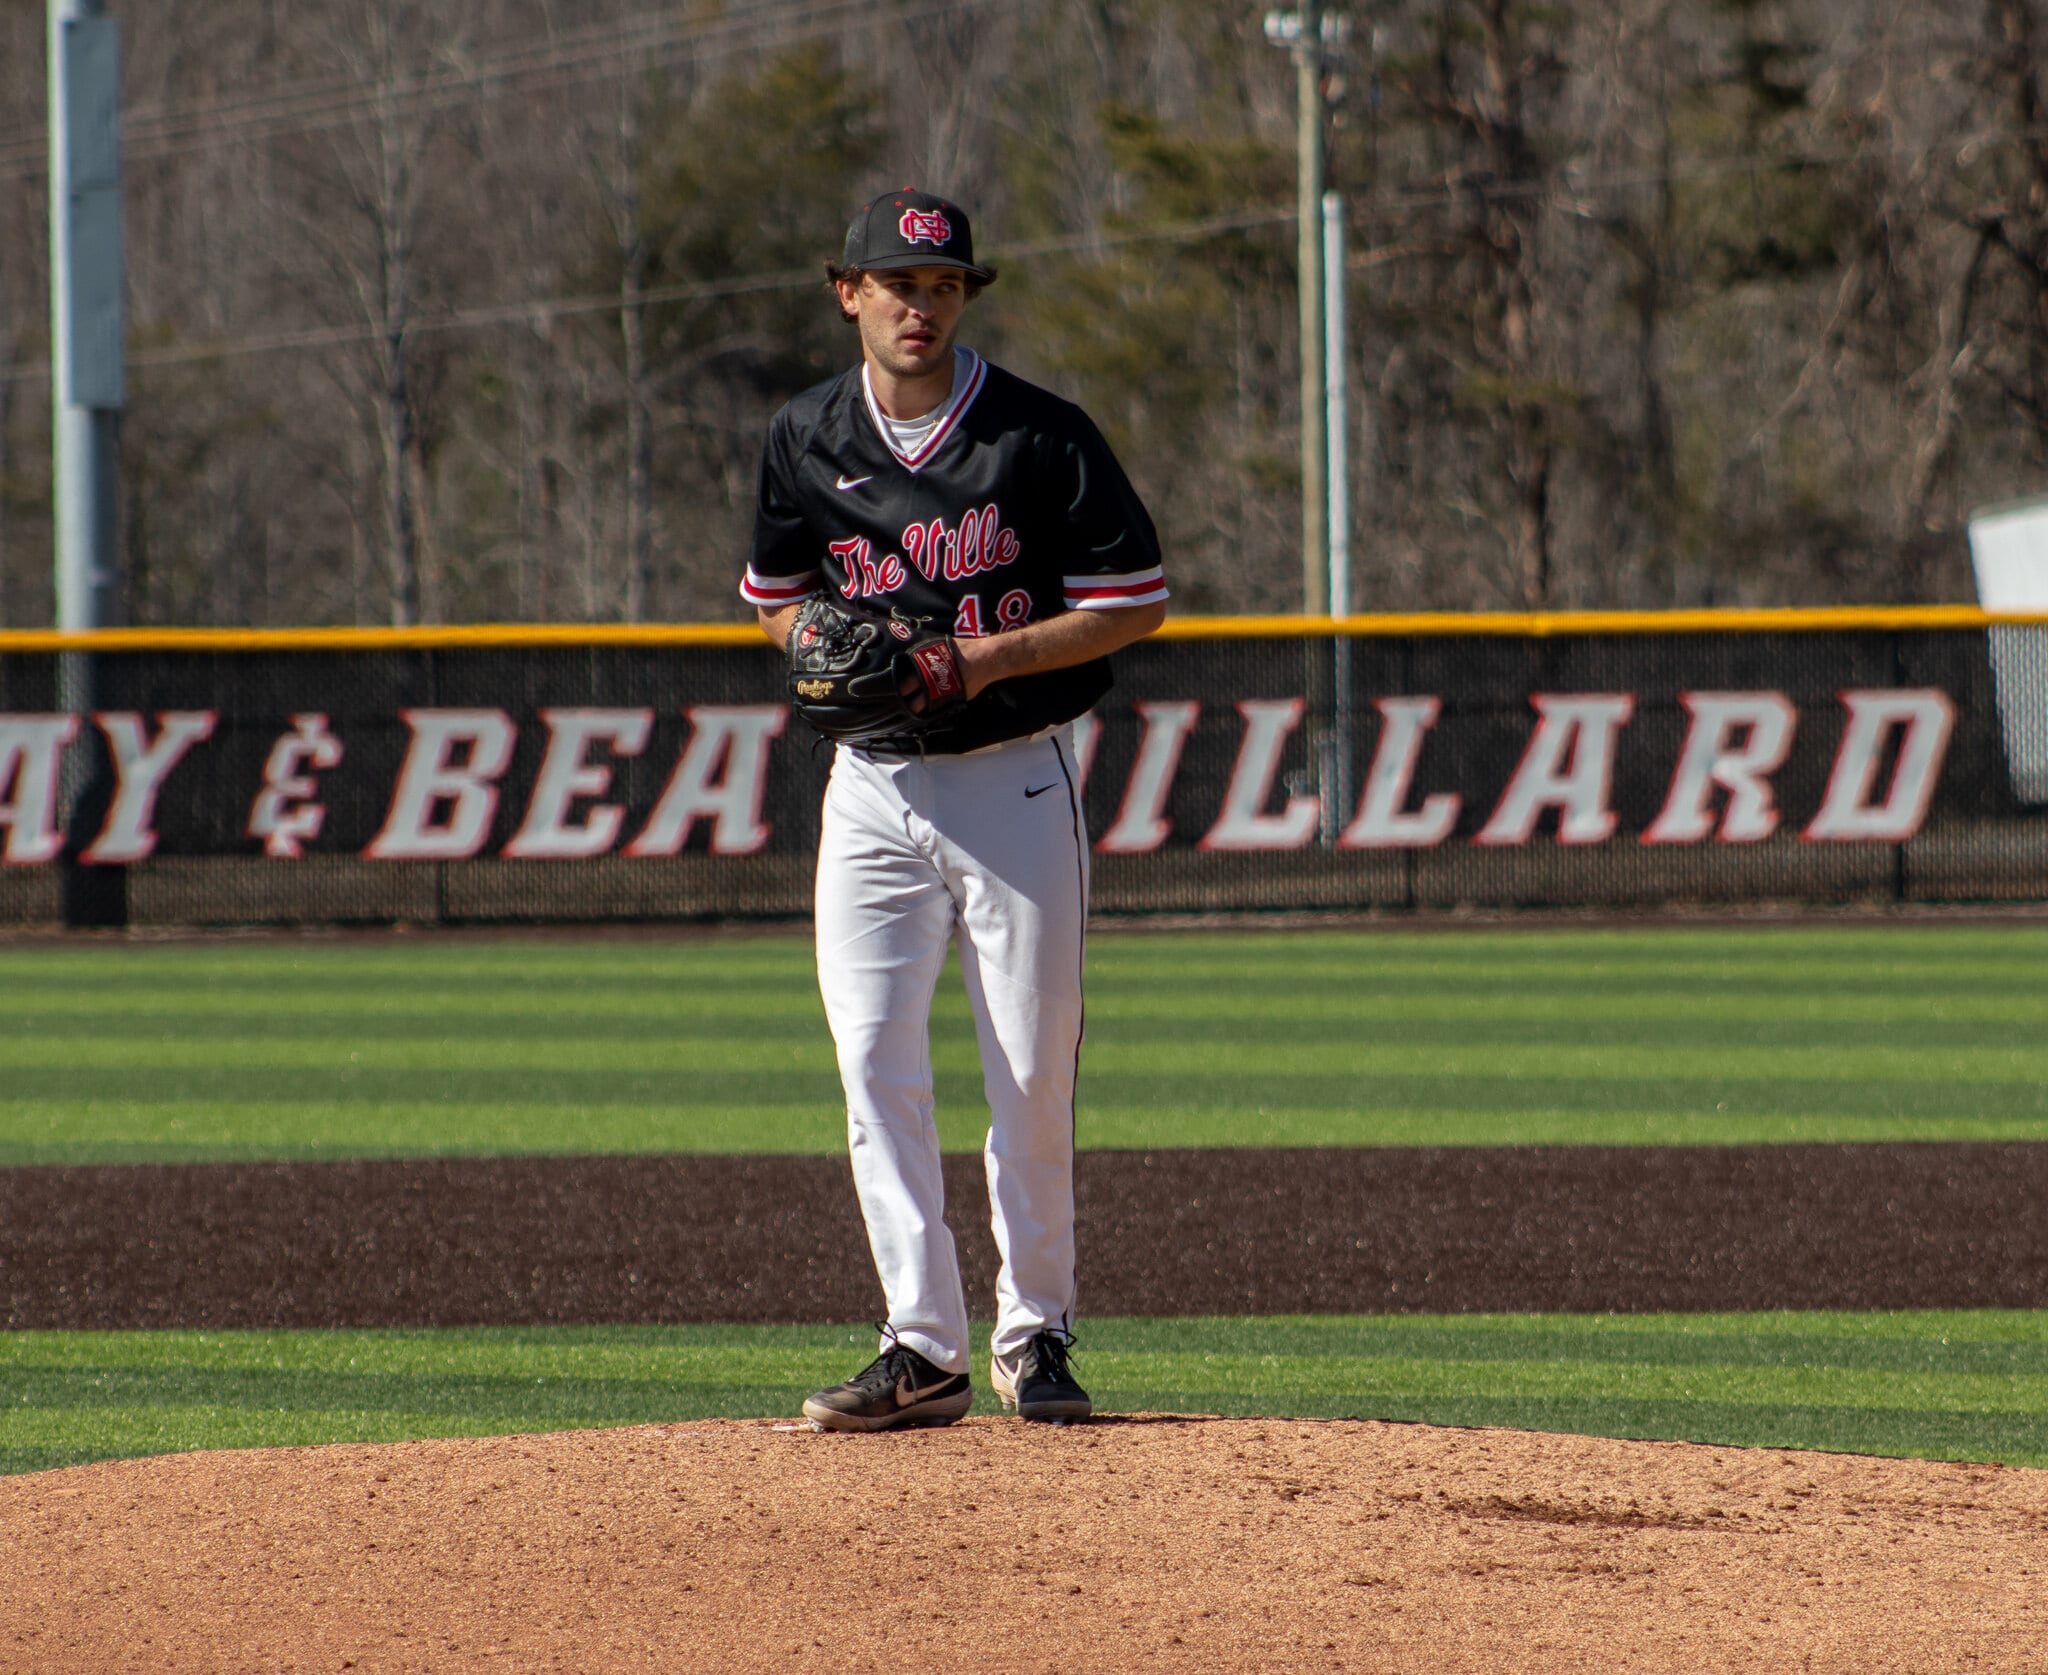 Transfer pitcher Zach Taglieri pitches his first home game at NGU.